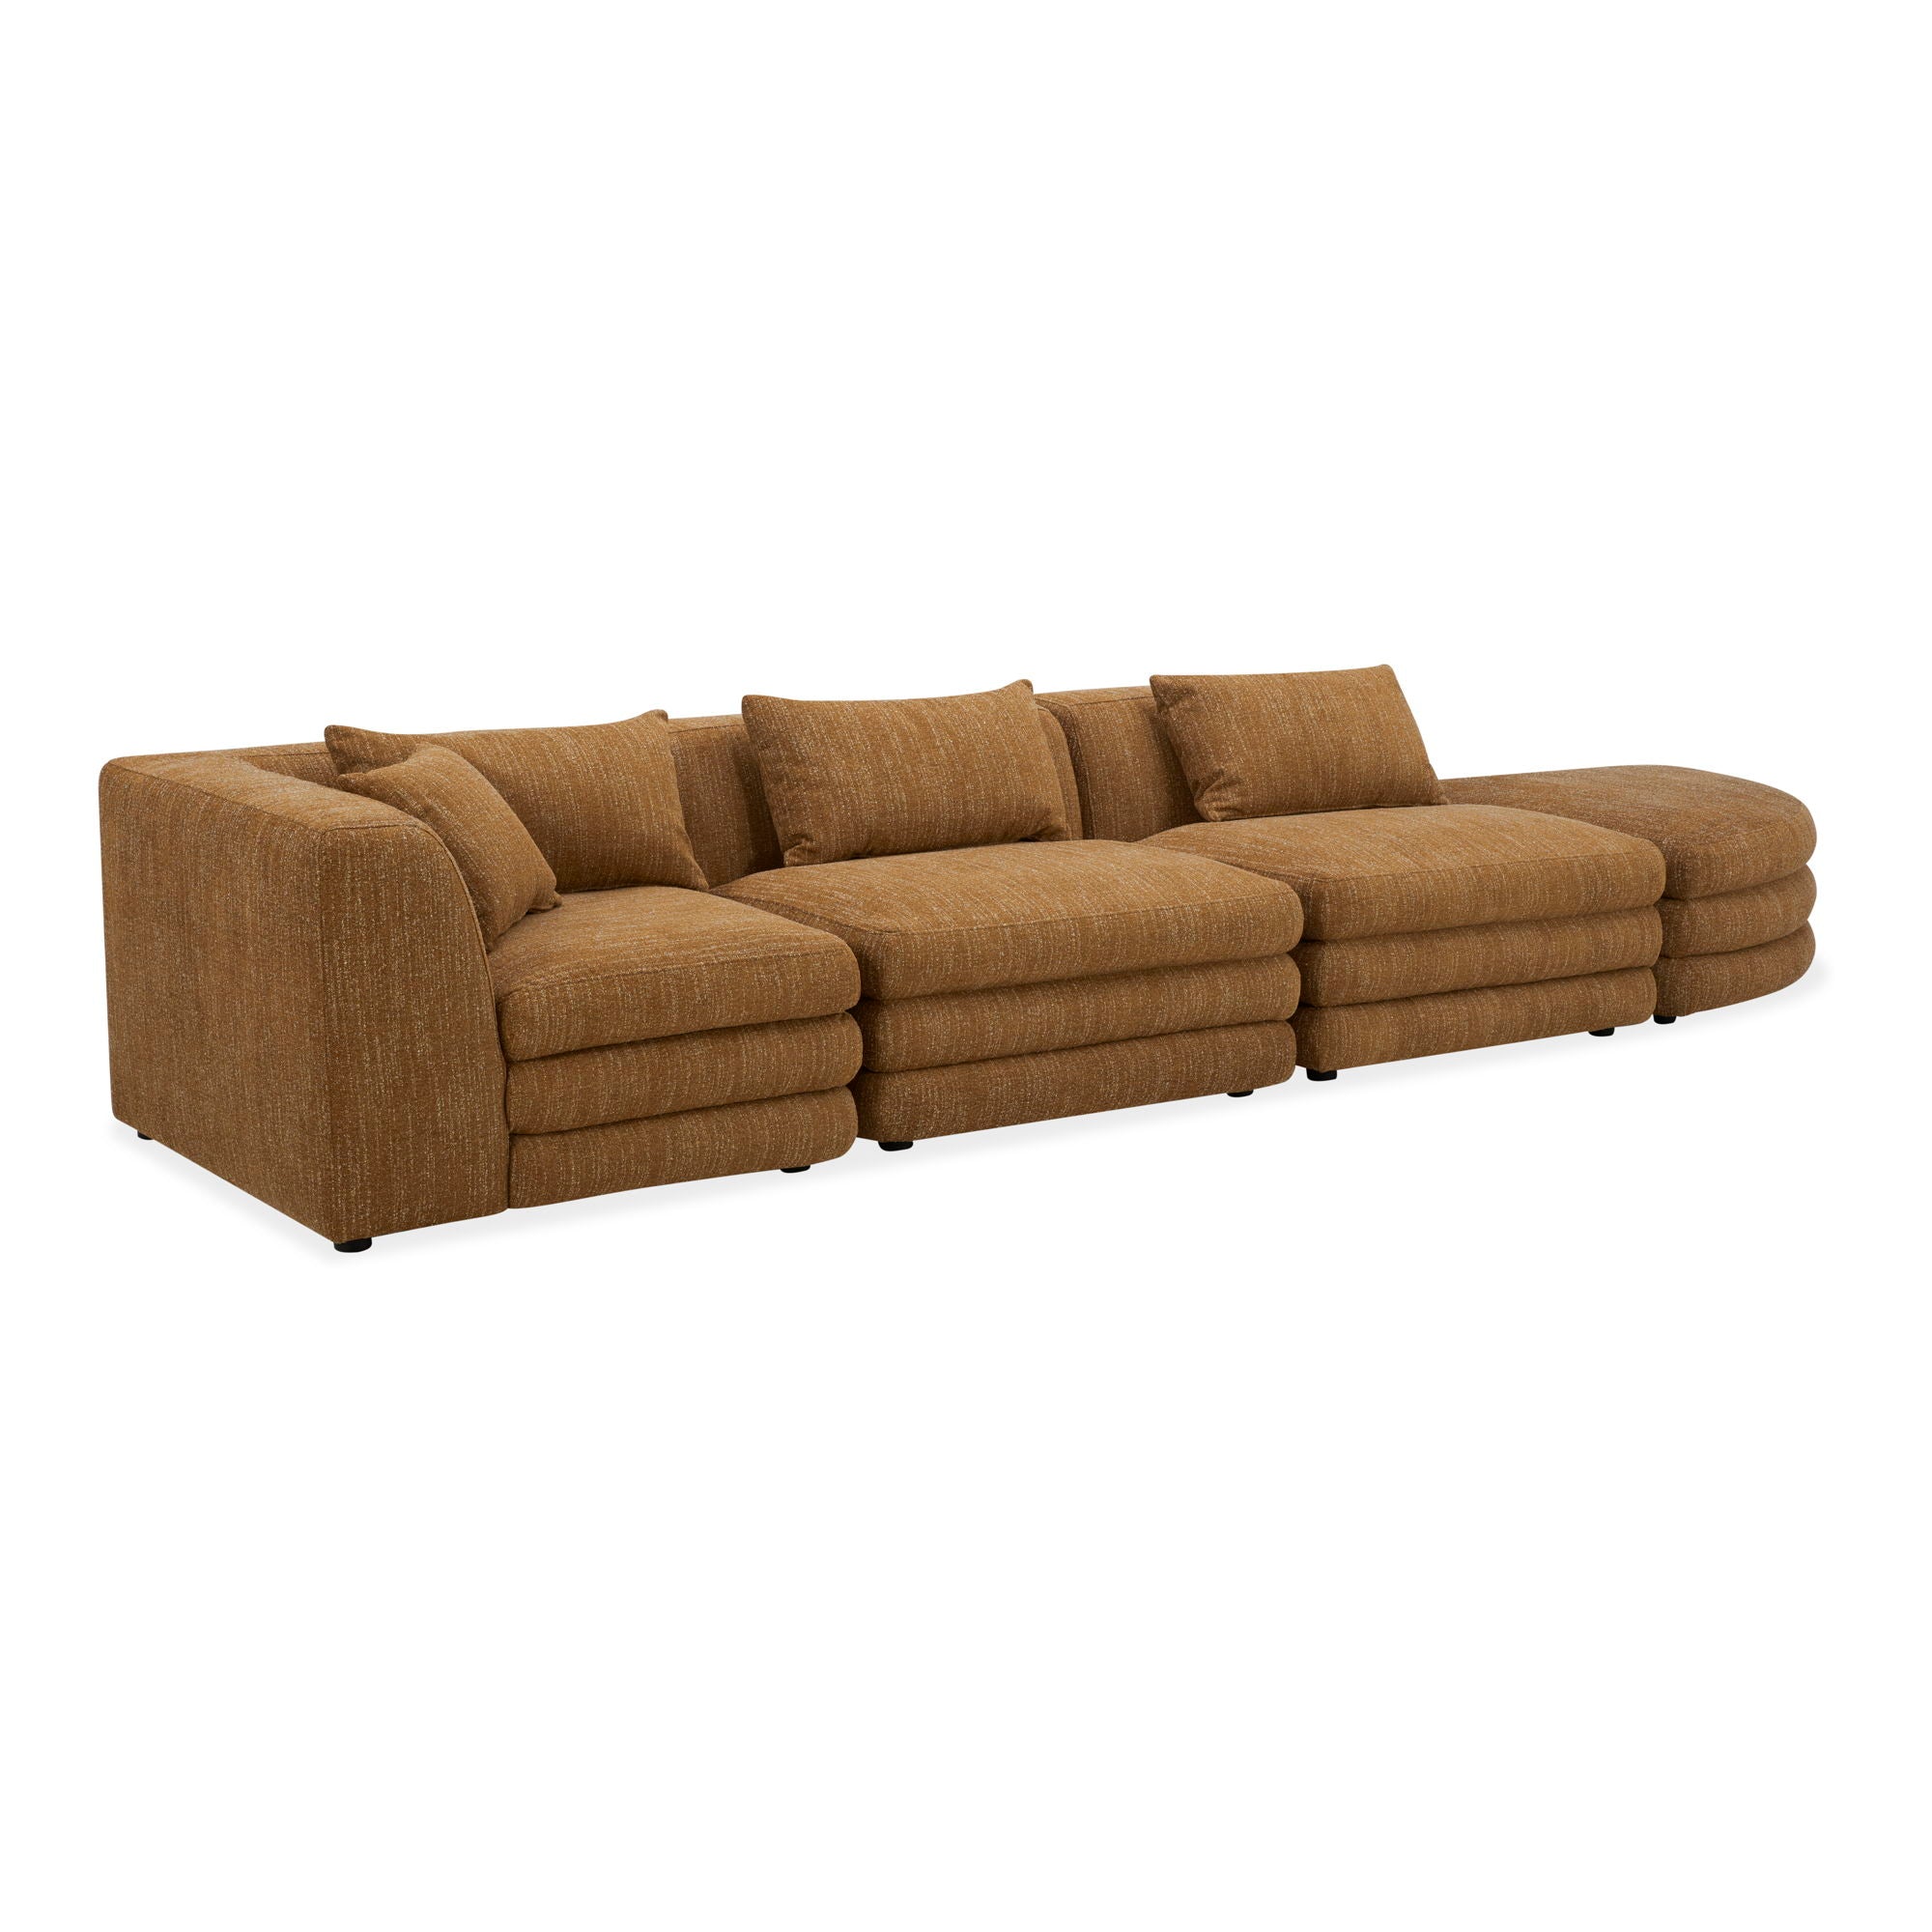 Lowtide - Linear Modular Sectional - Amber Glow-Stationary Sectionals-American Furniture Outlet